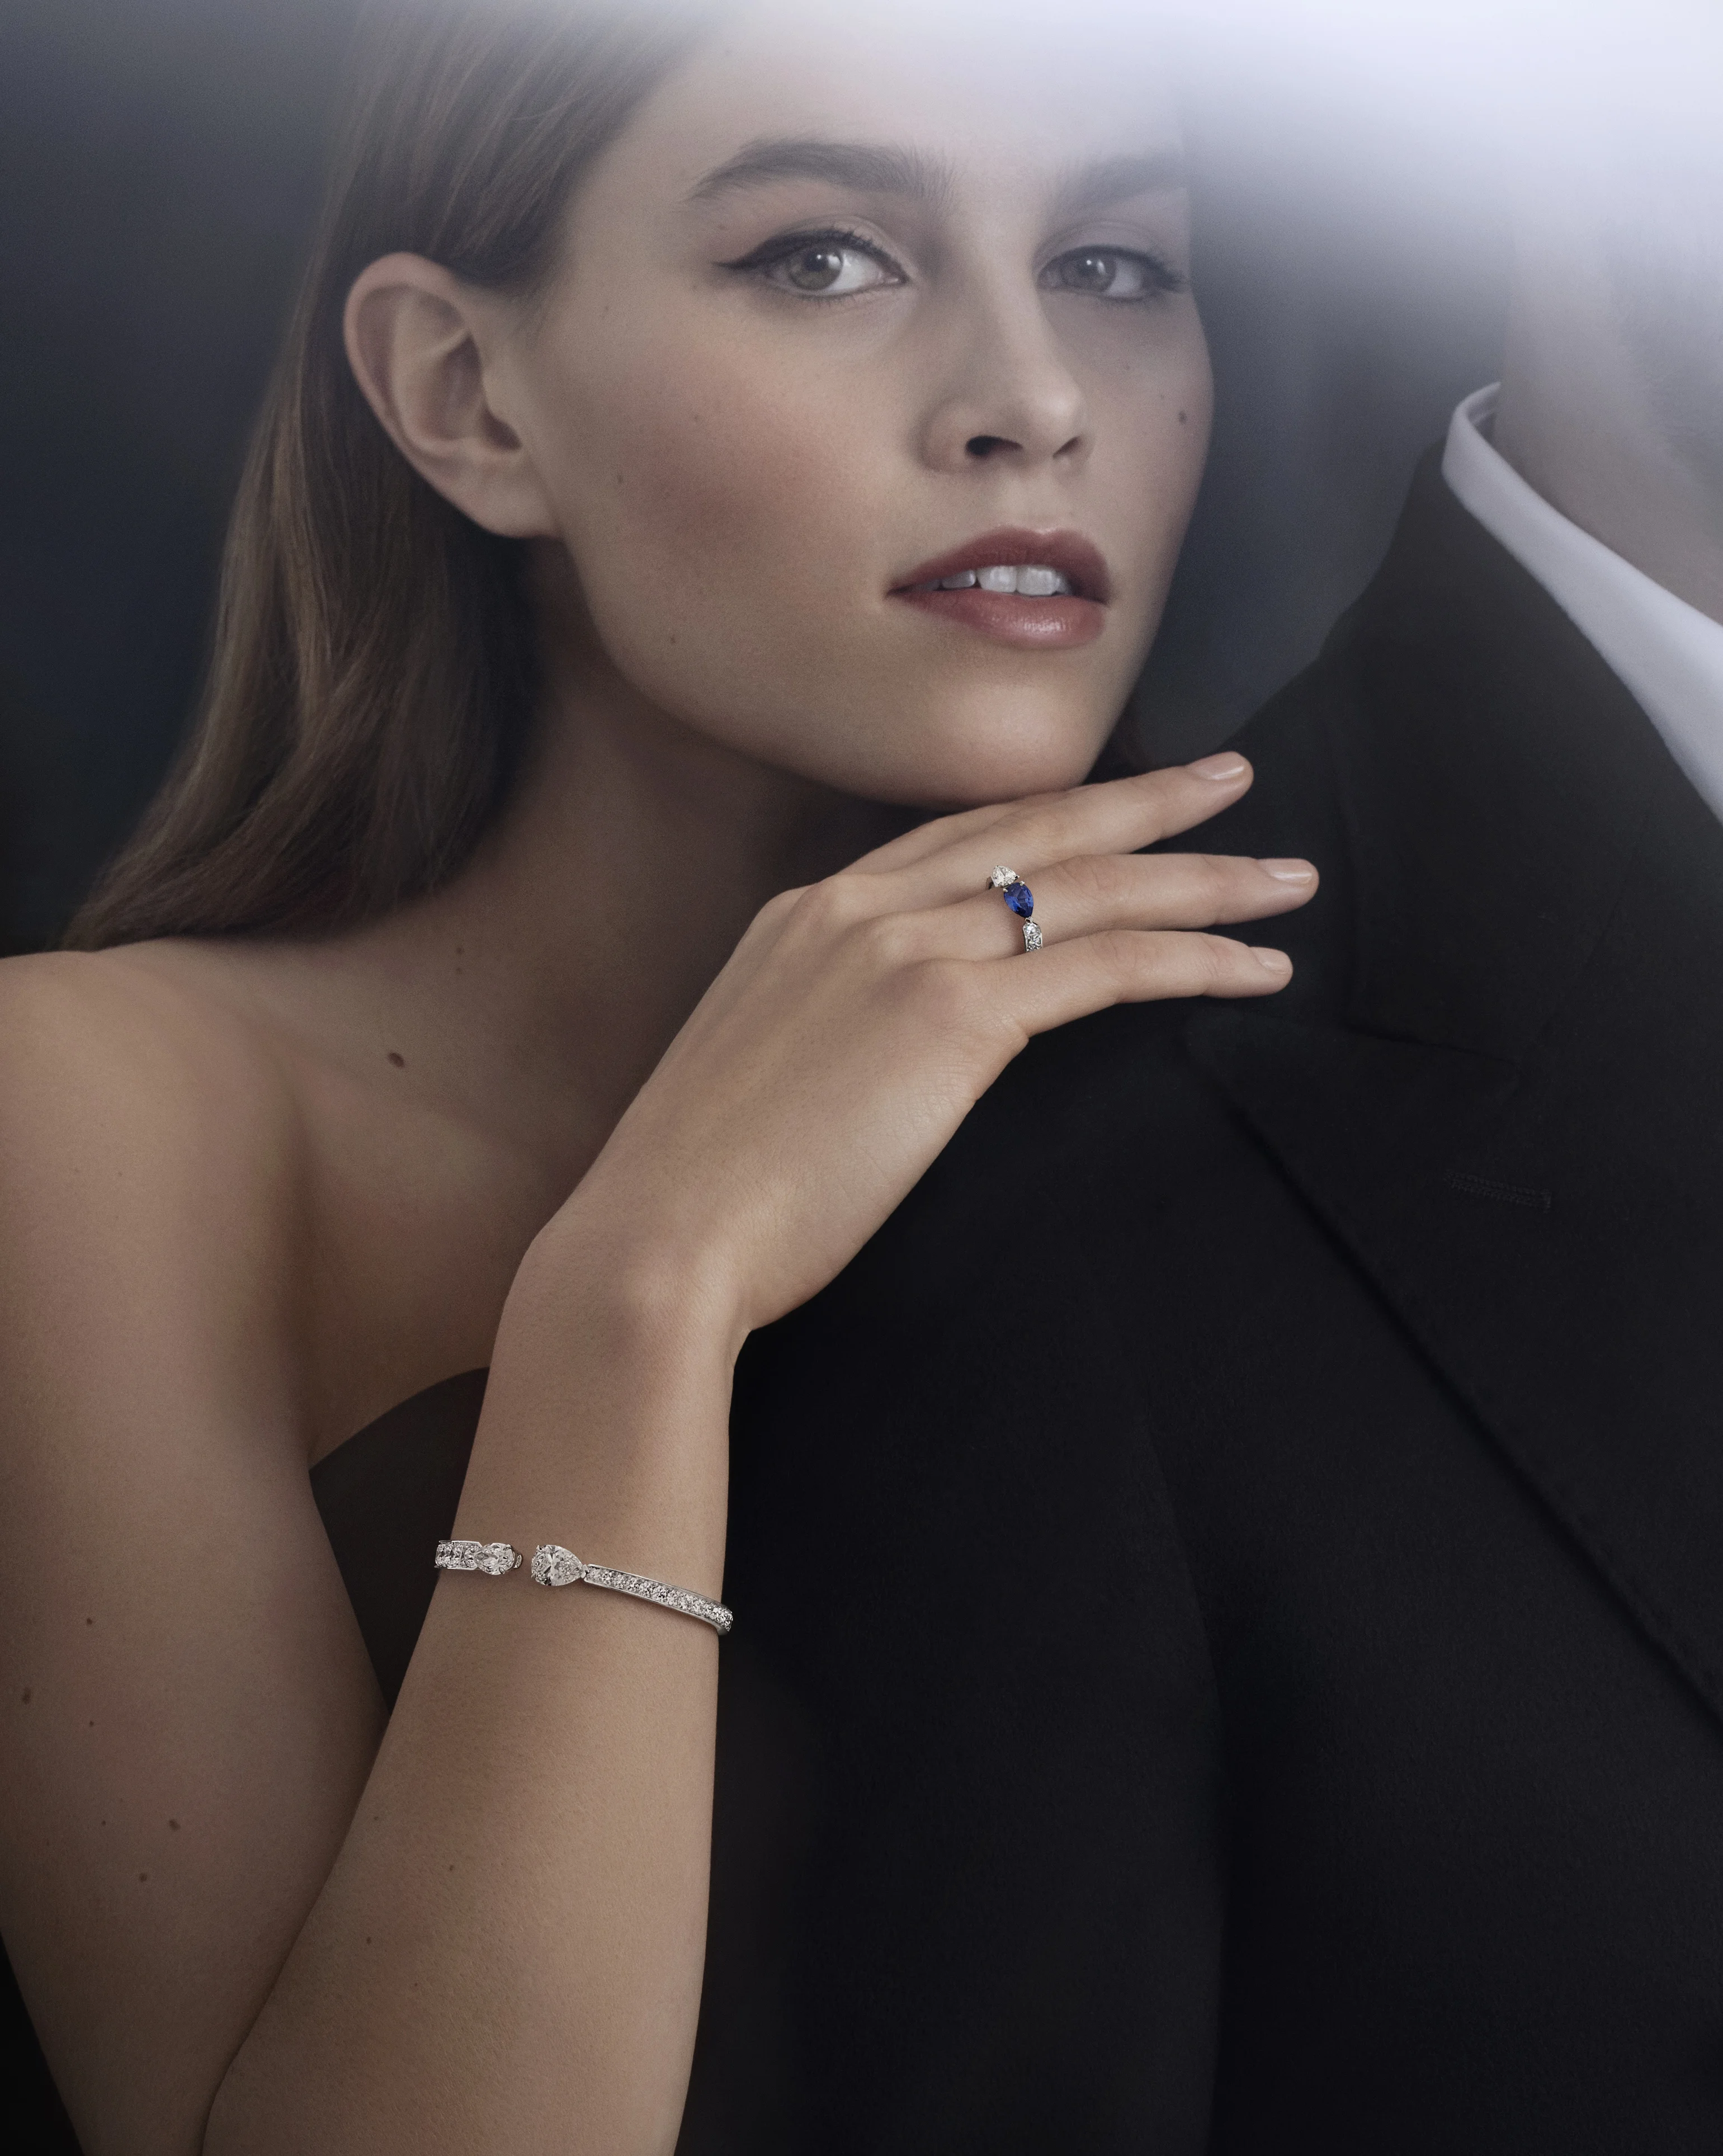 Joséphine Duo Éternal ring in white gold with diamonds and sapphire $475,000 Joséphine Duo Éternal bracelet in white gold with diamonds $1,620,000